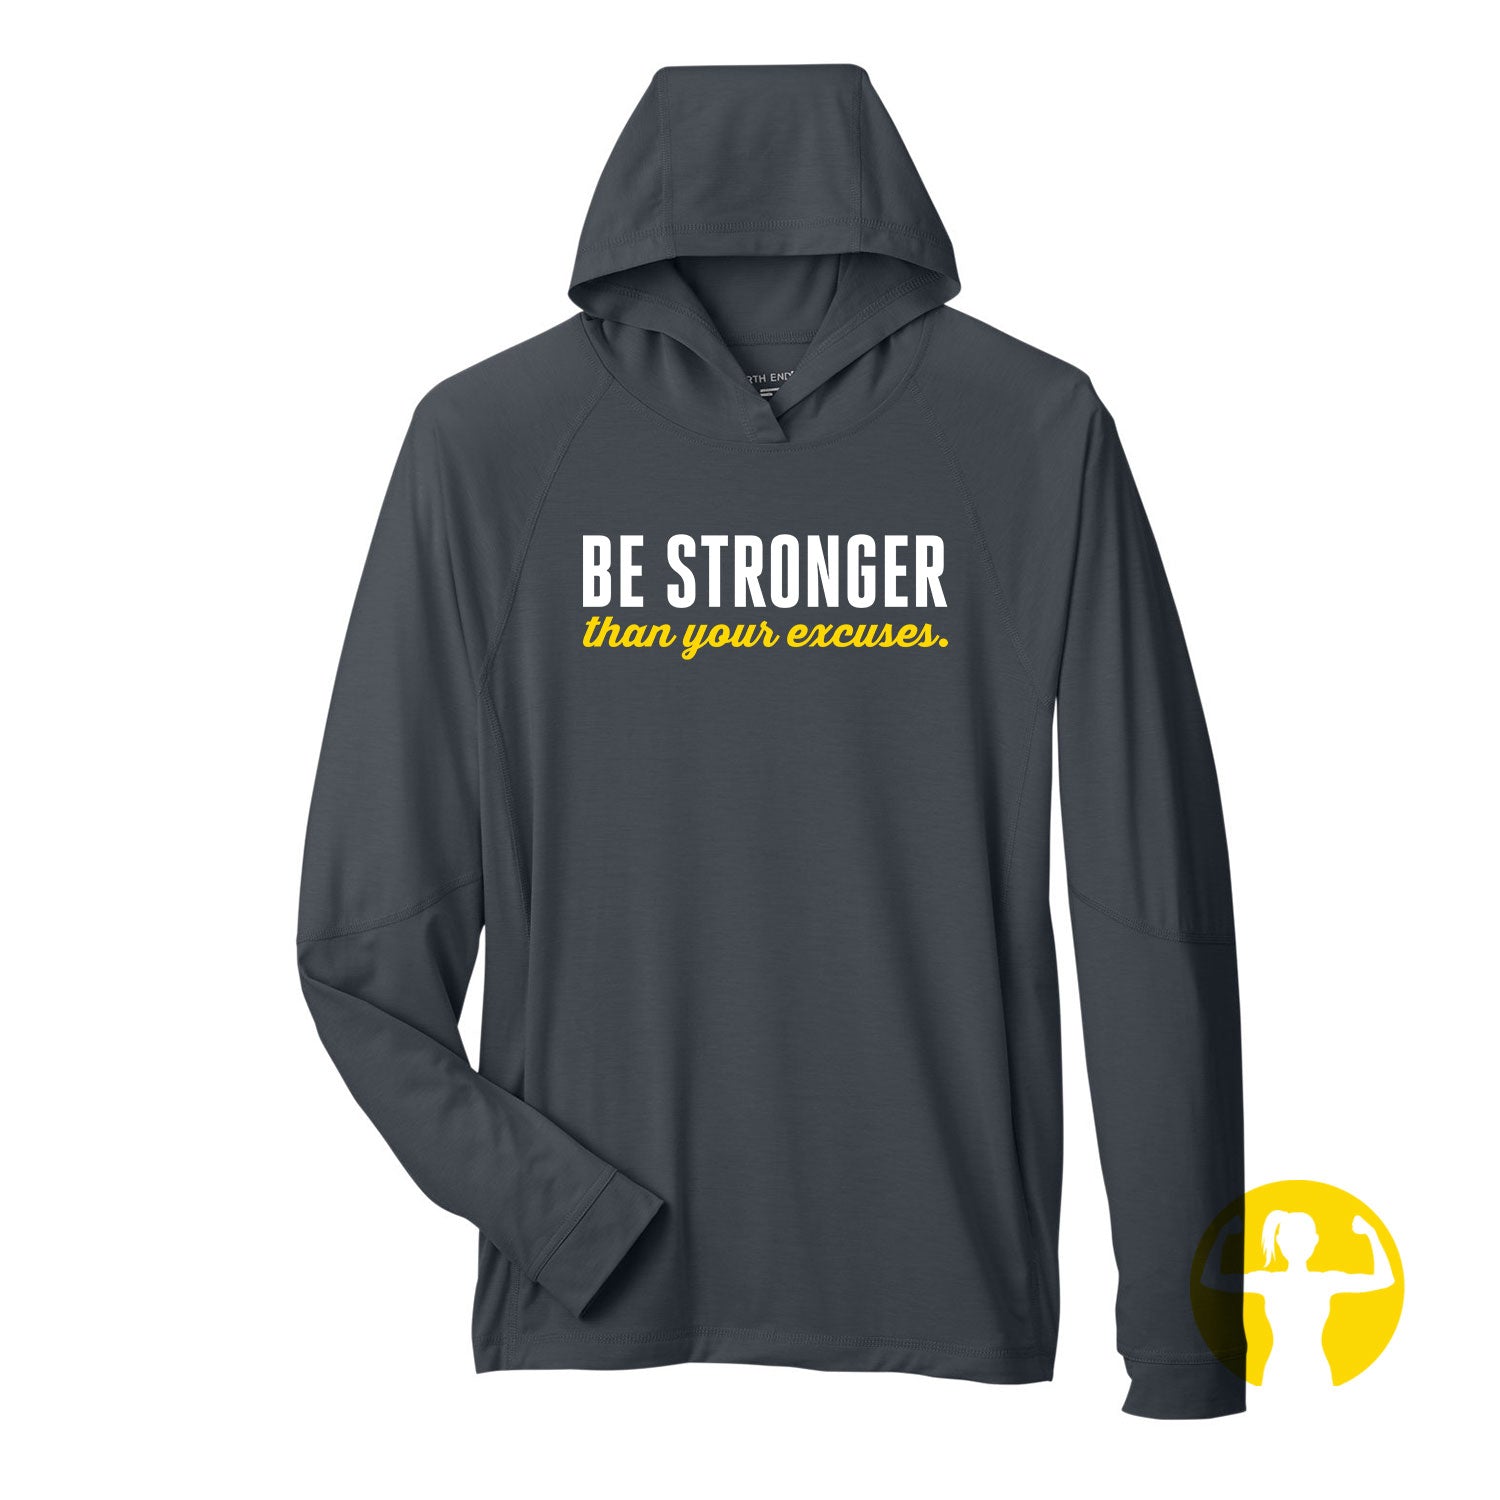 Be Stronger Than Your Excuses. Stretch Performance Hoodie with Thumbholes (XXS-3XL)